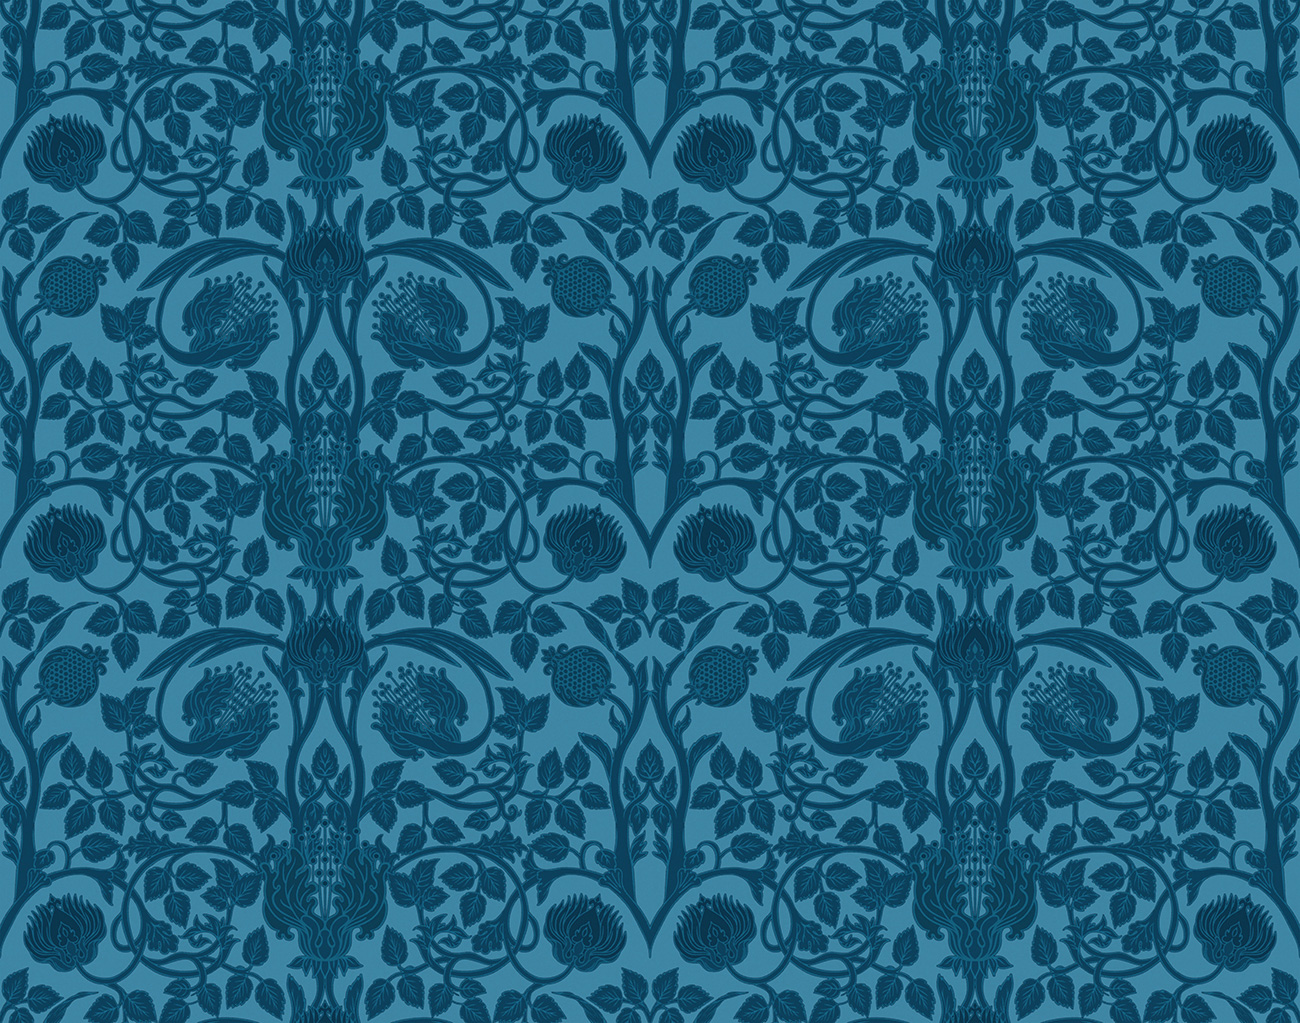 Damask wallpaper with petrol blue floral pattern